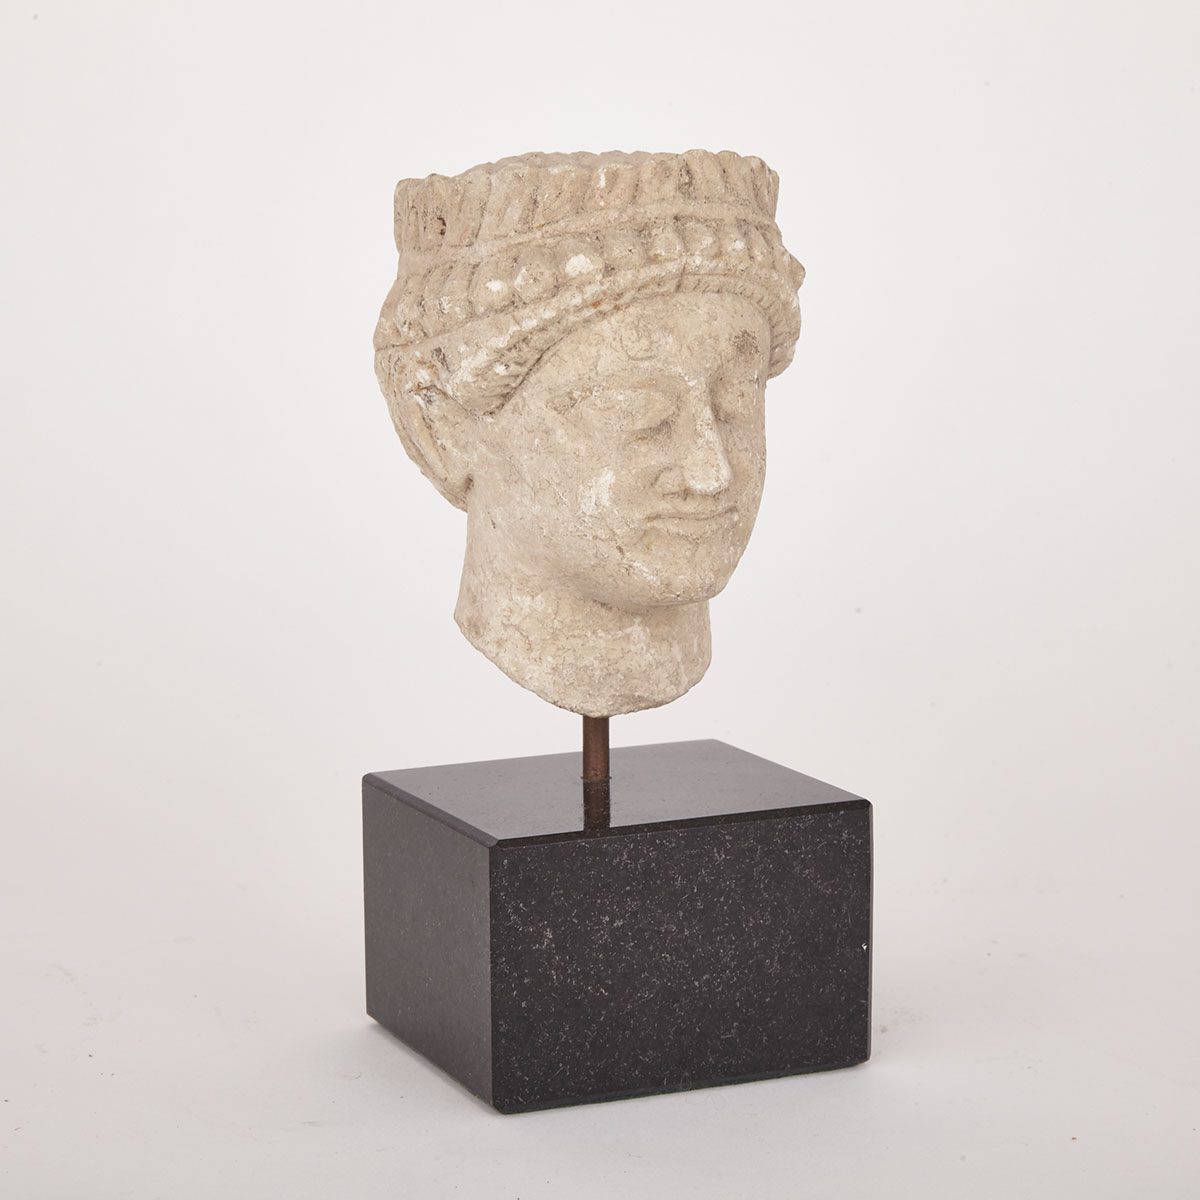 Cypriot Limestone Head of a Male Votary, c.450 BC